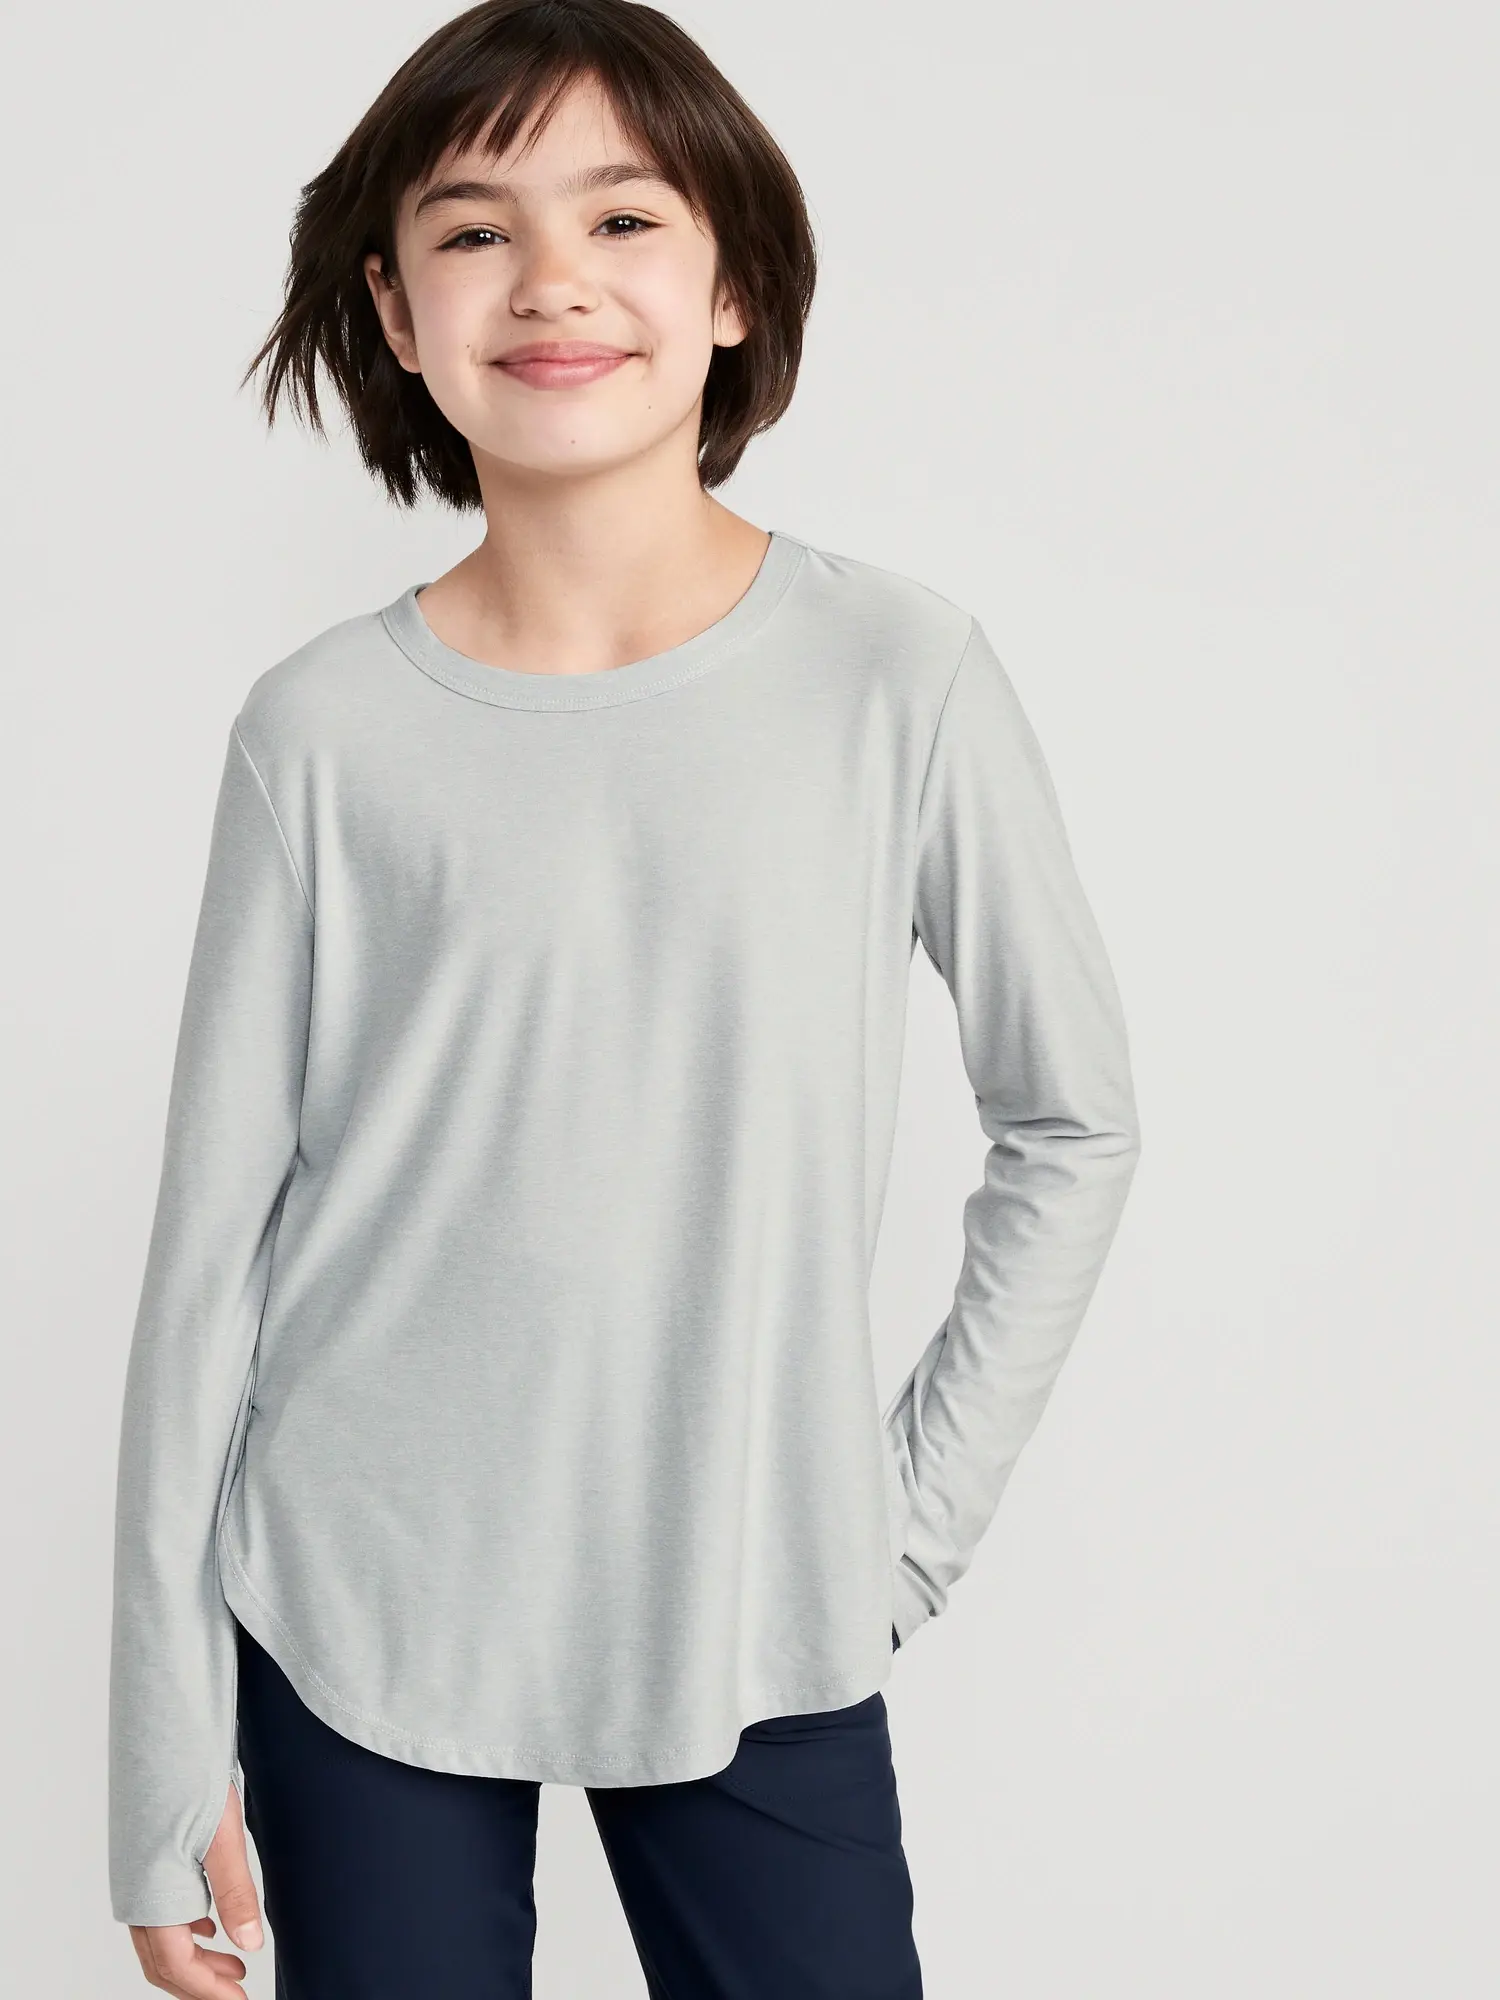 Old Navy Cloud 94 Soft Go-Dry Long-Sleeve T-Shirt for Girls gray. 1